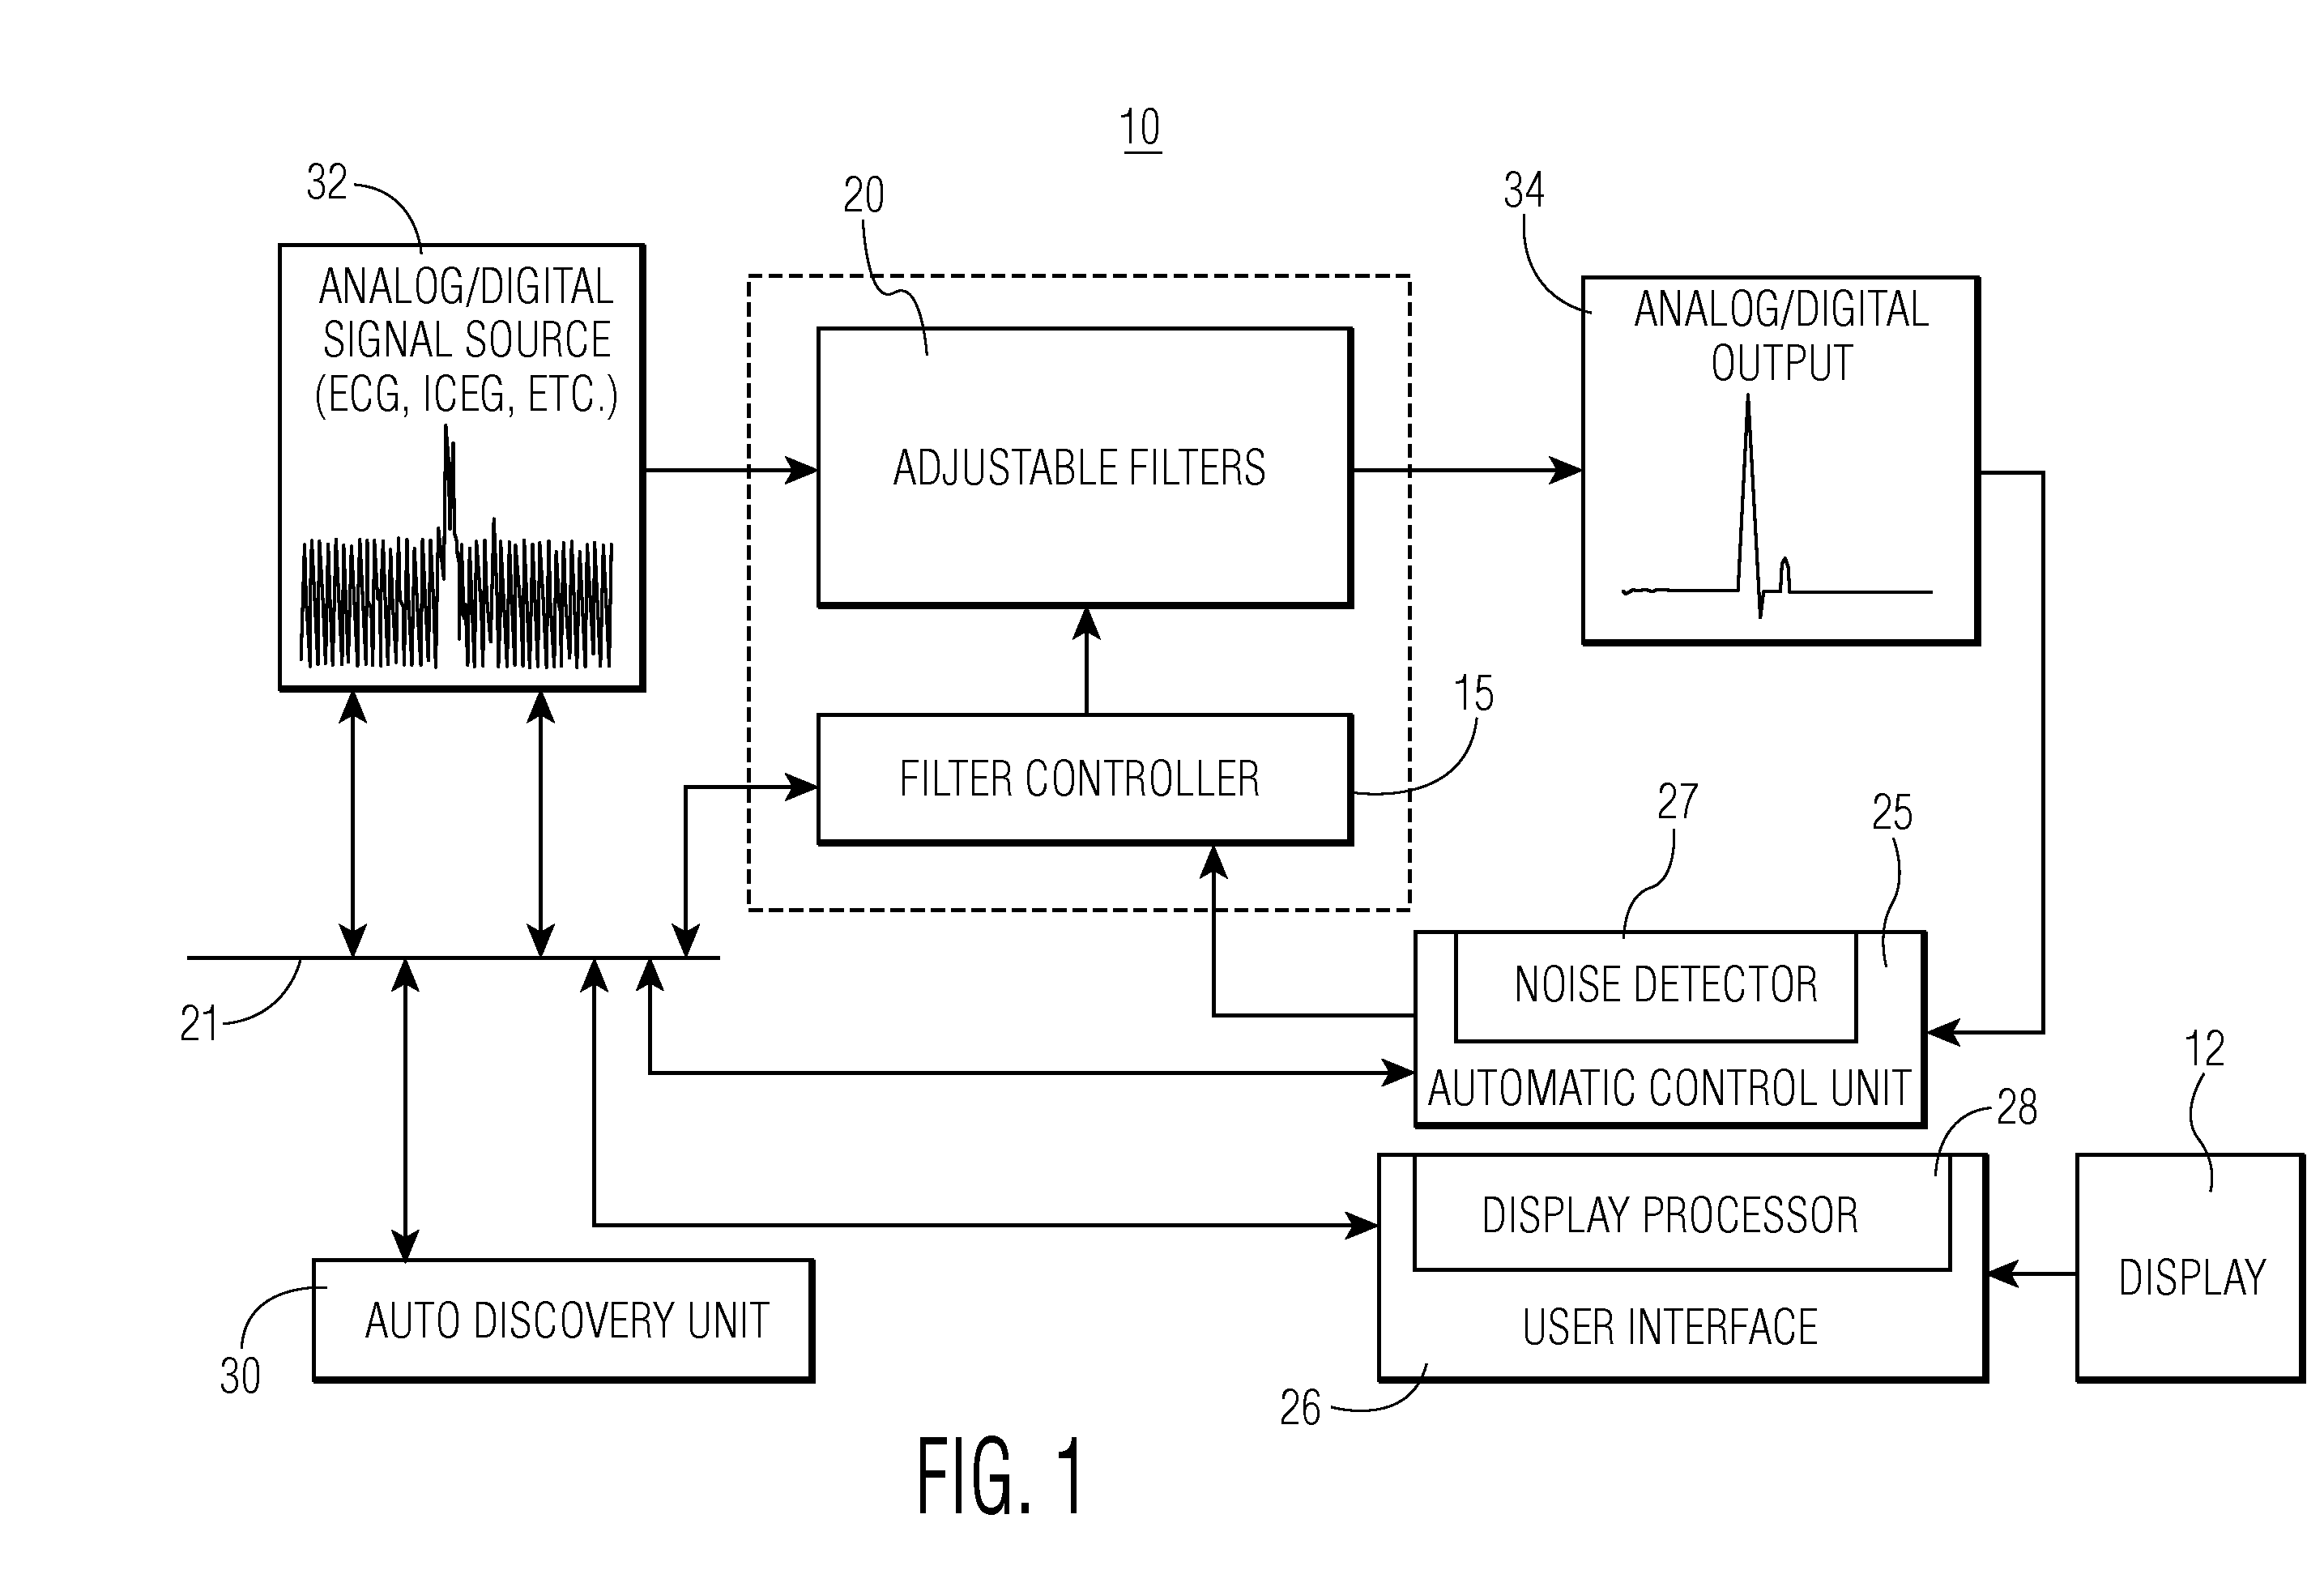 Adaptive Filtering System for Patient Signal Monitoring